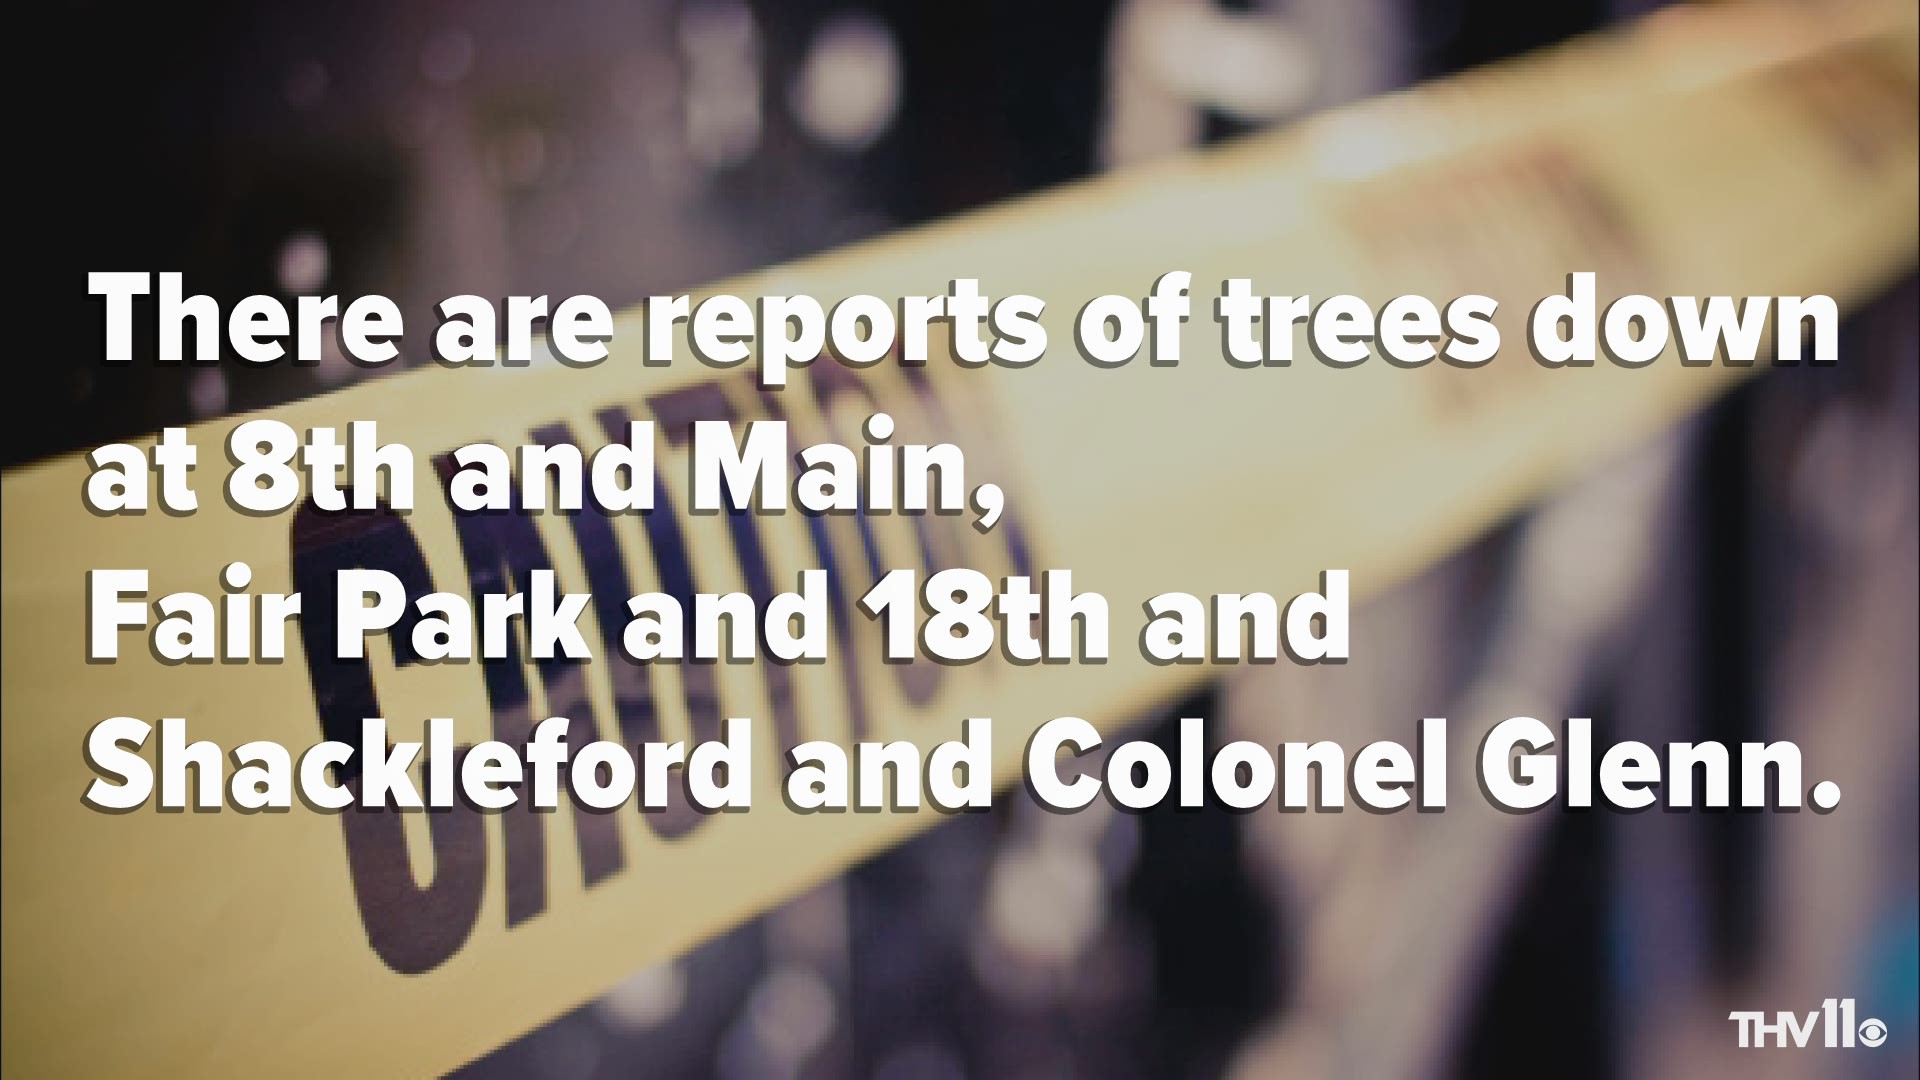 Multiple trees are reported down in the Little Rock area.